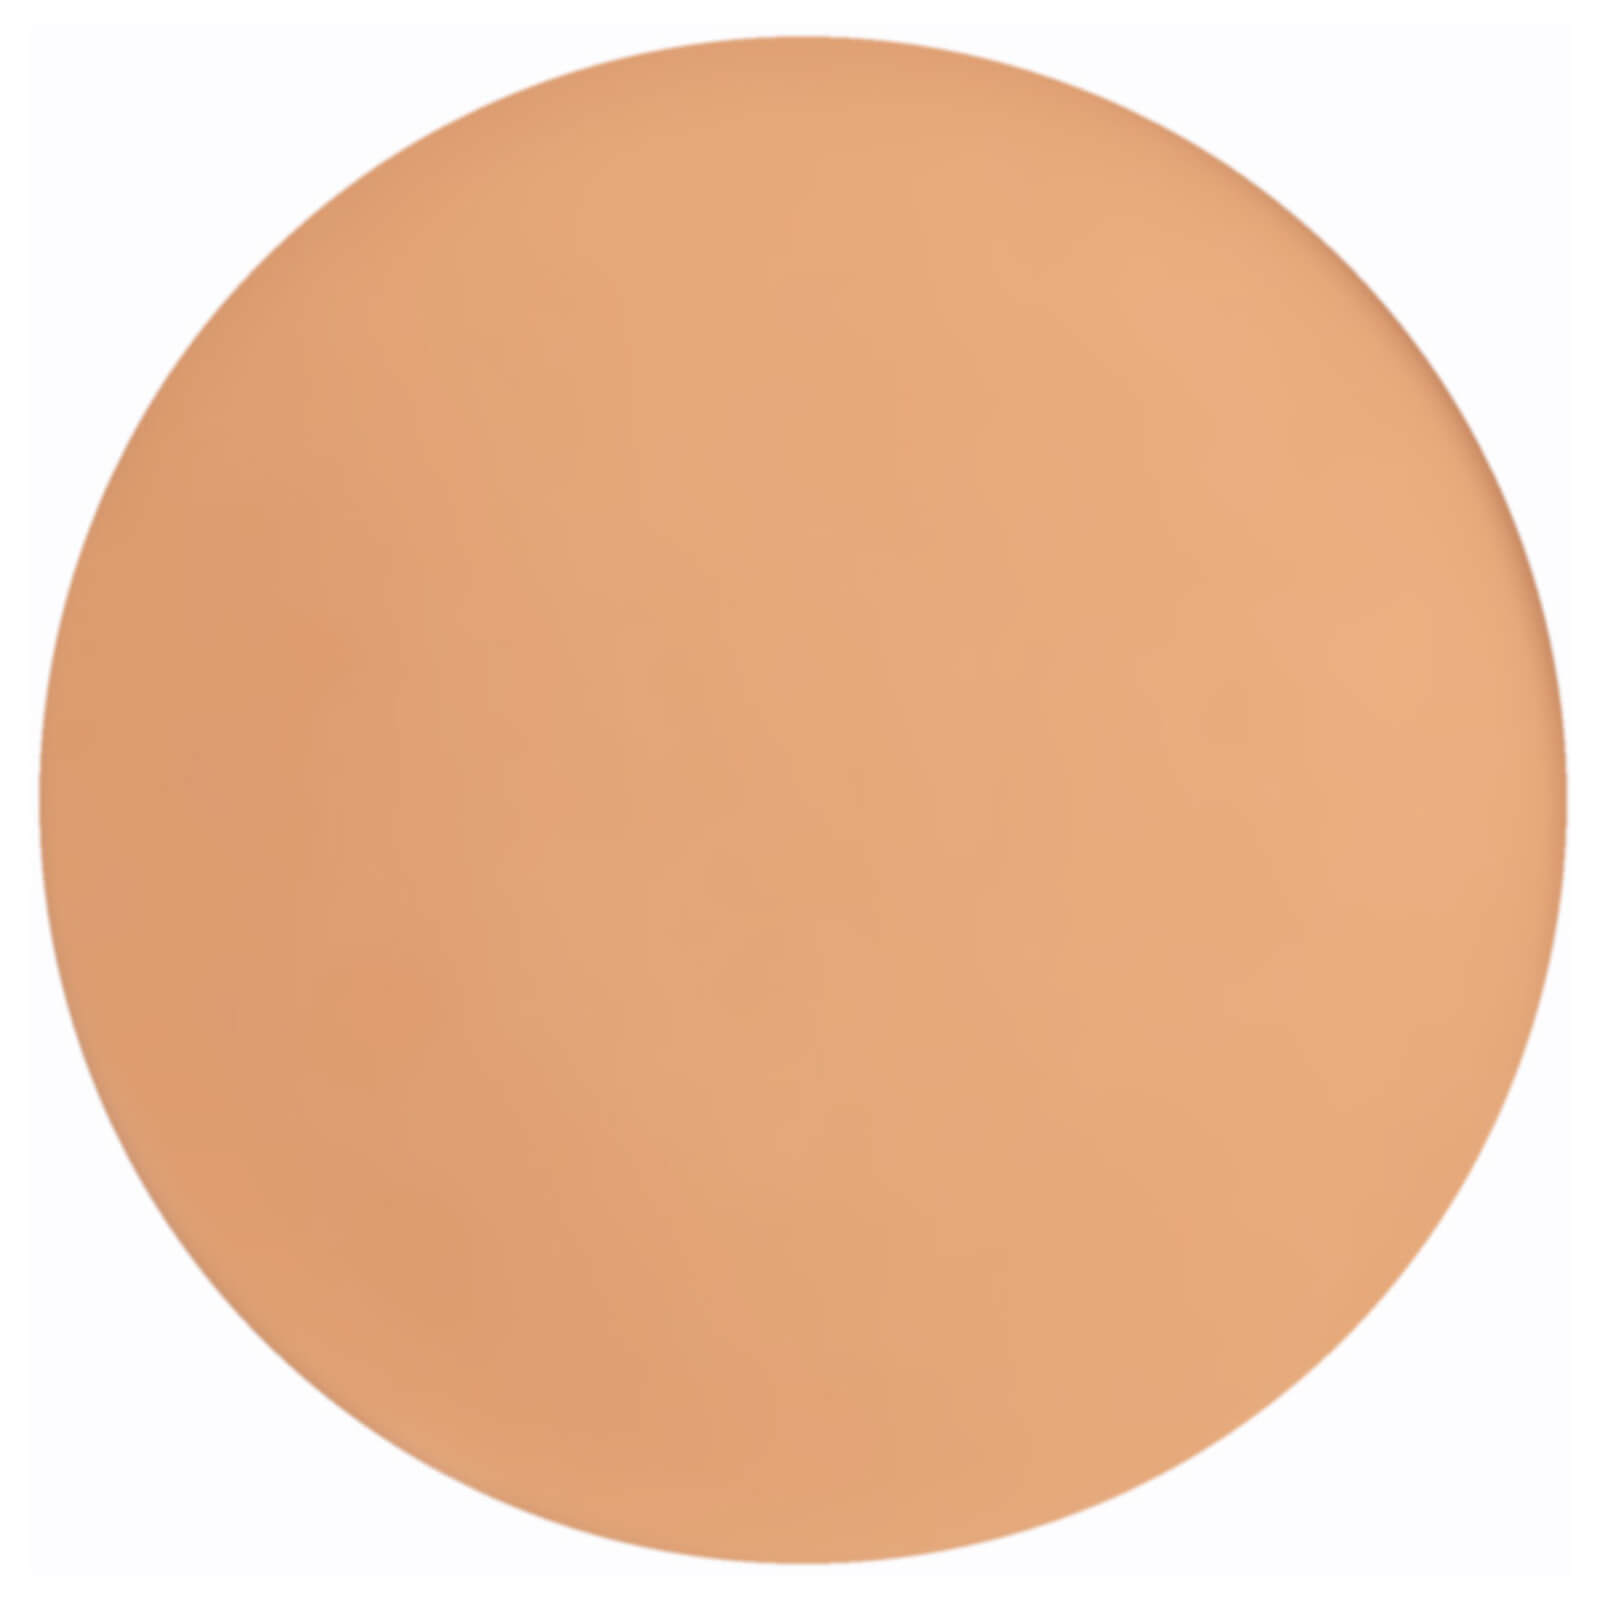 Youngblood Mineral Radiance Creme Powder Foundation Refill 7g (Various Shades) - Coffee